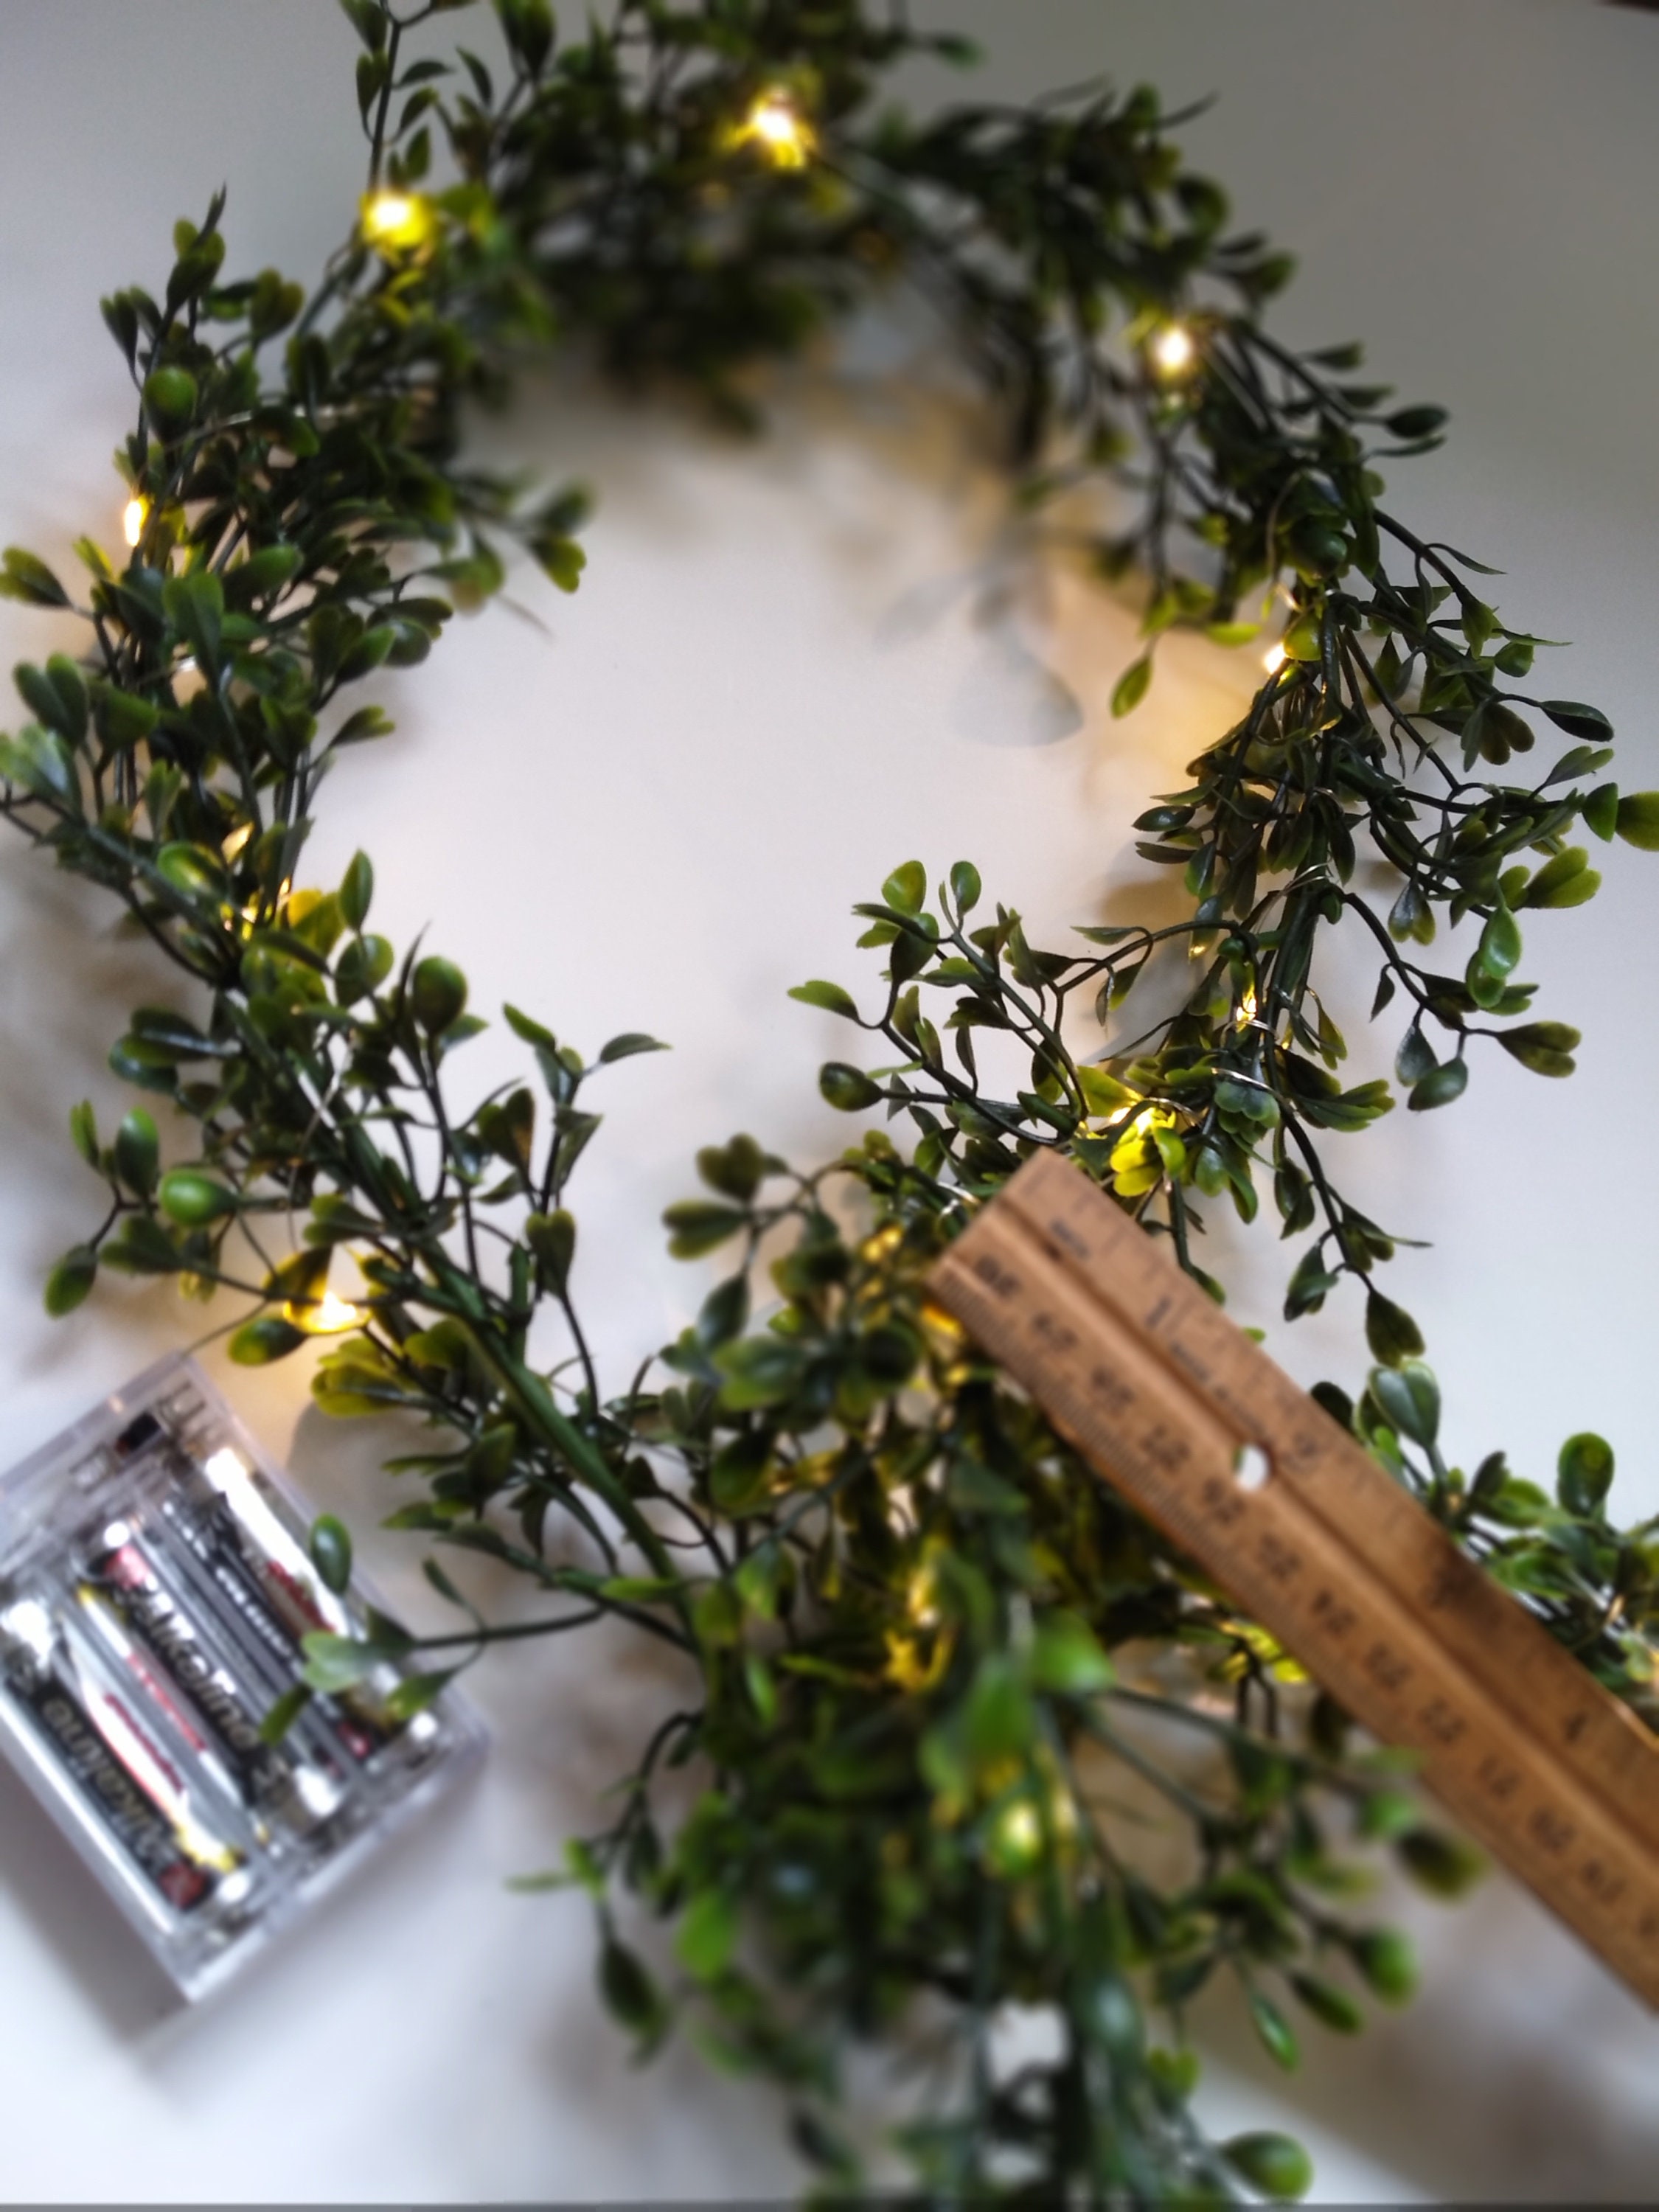 6-ft Electric LED Twig Garland | Mantel LED Garlands | Fast Shipping